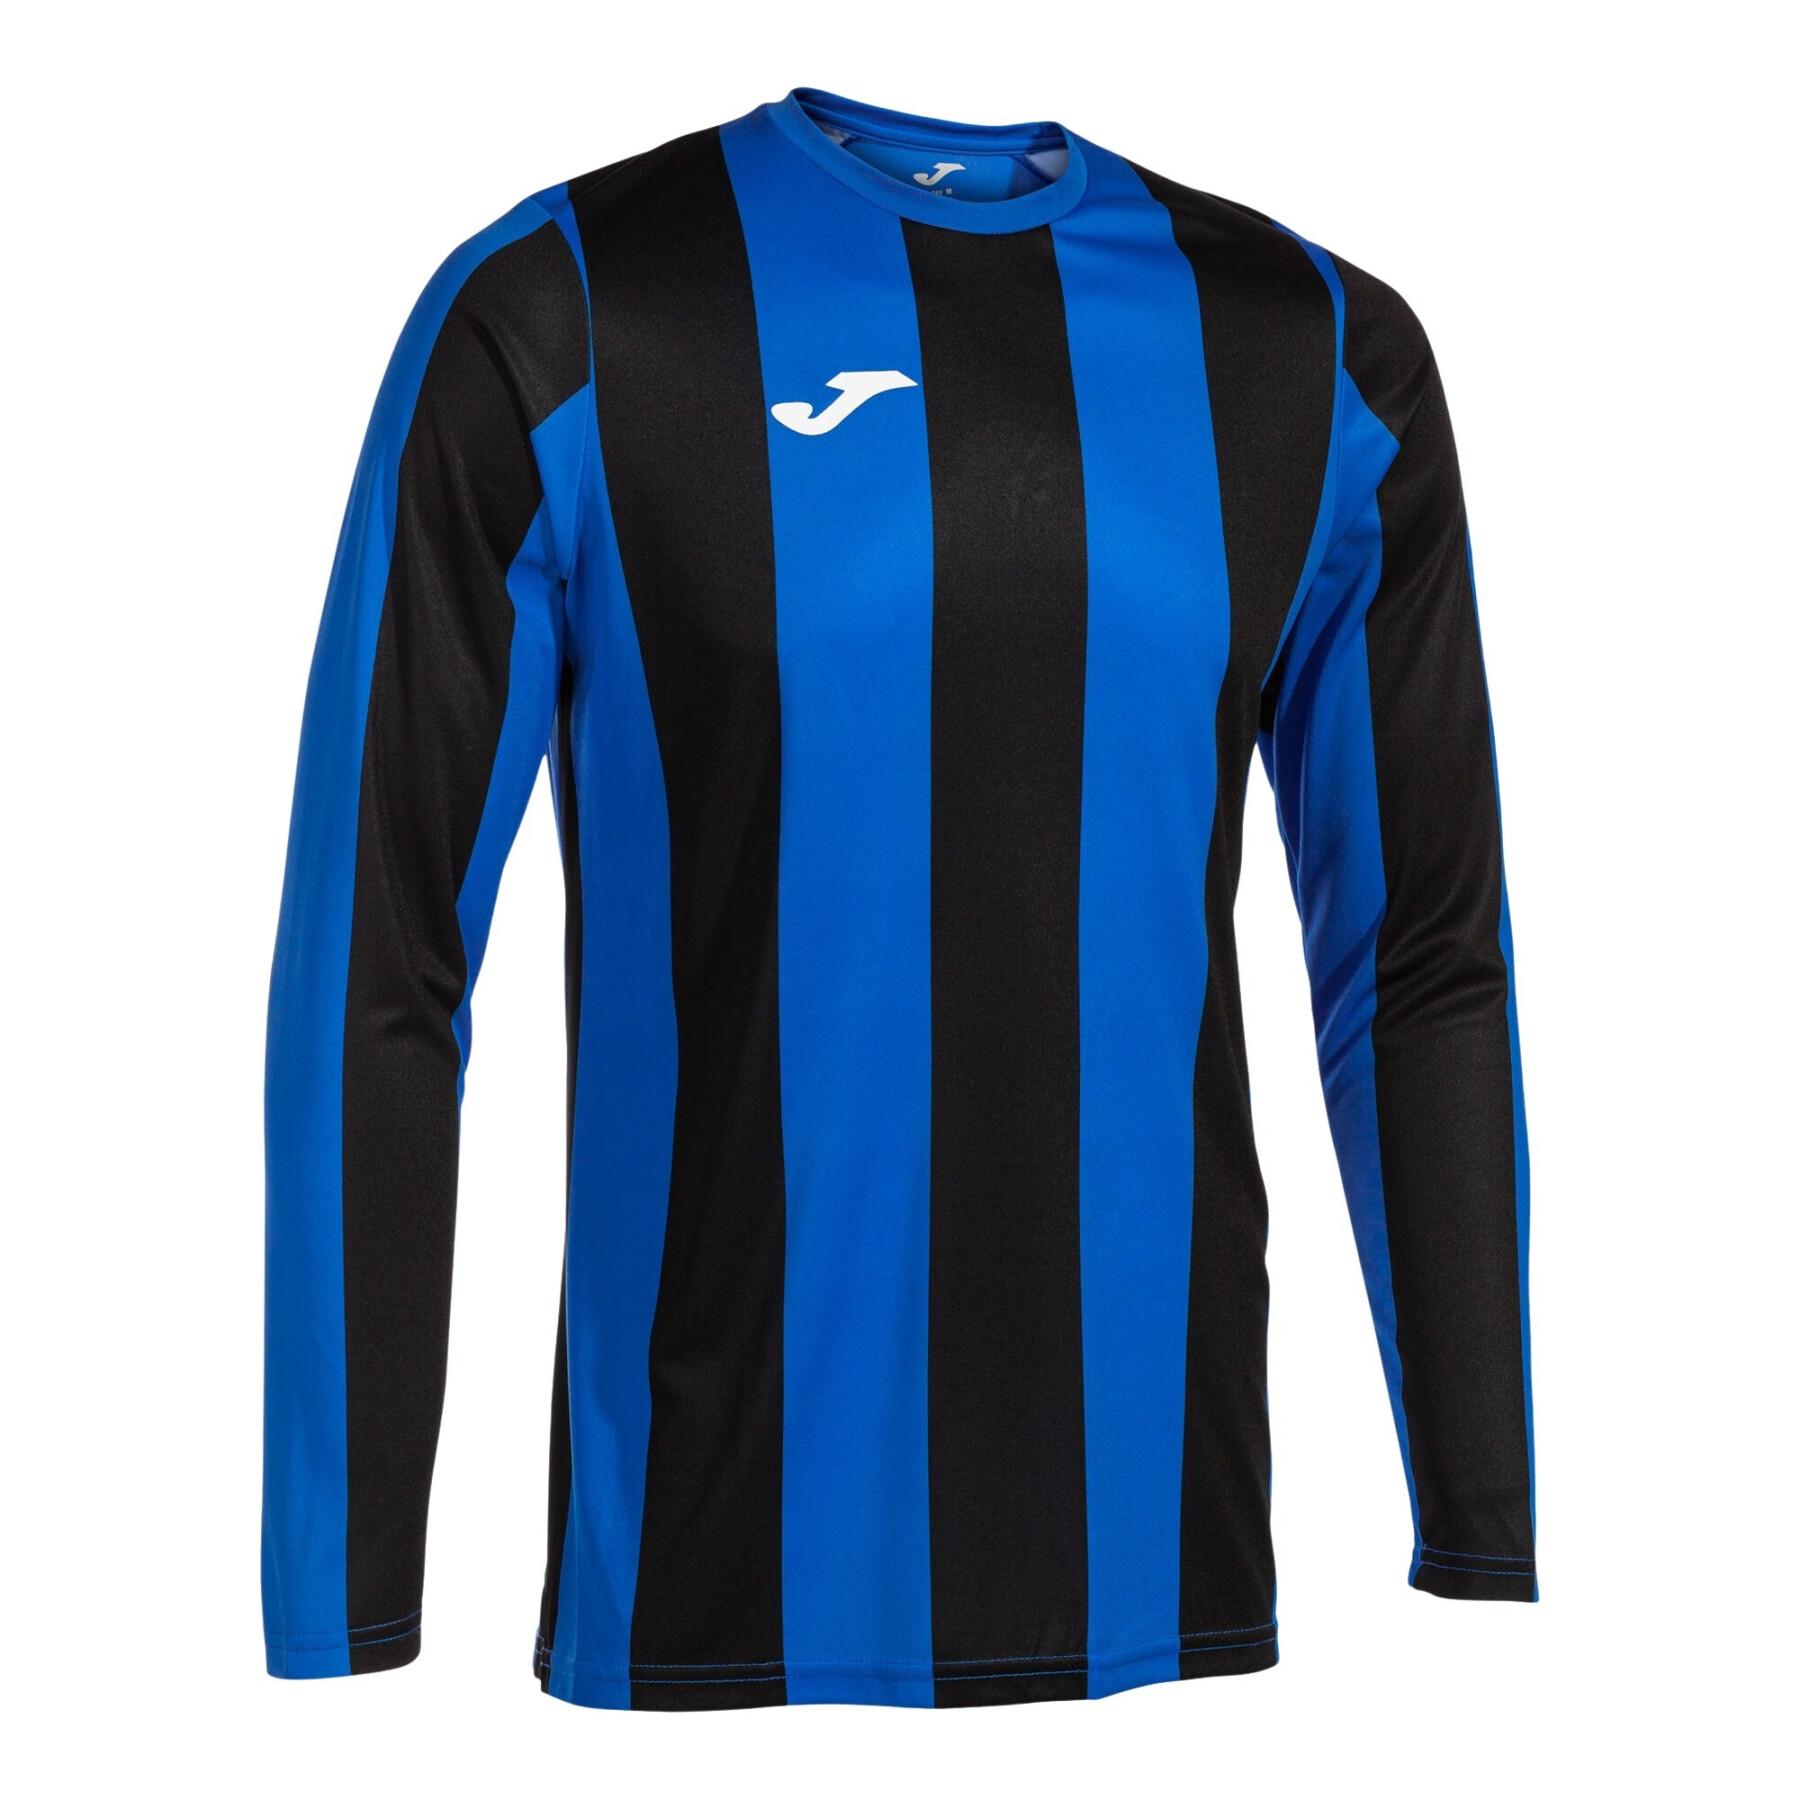 Maillot manches longues enfant Joma Inter Classic